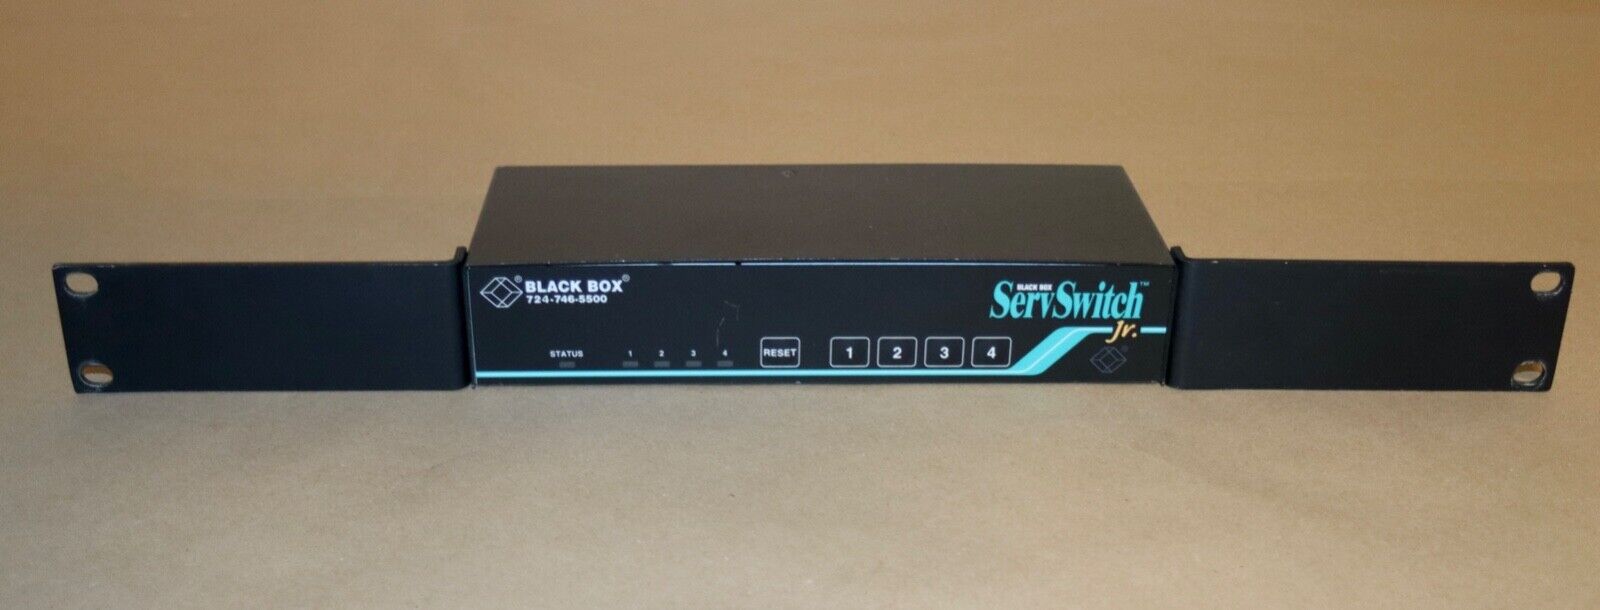 BLACK BOX SERV SWITCH  - NO POWER CORD INCLUDED